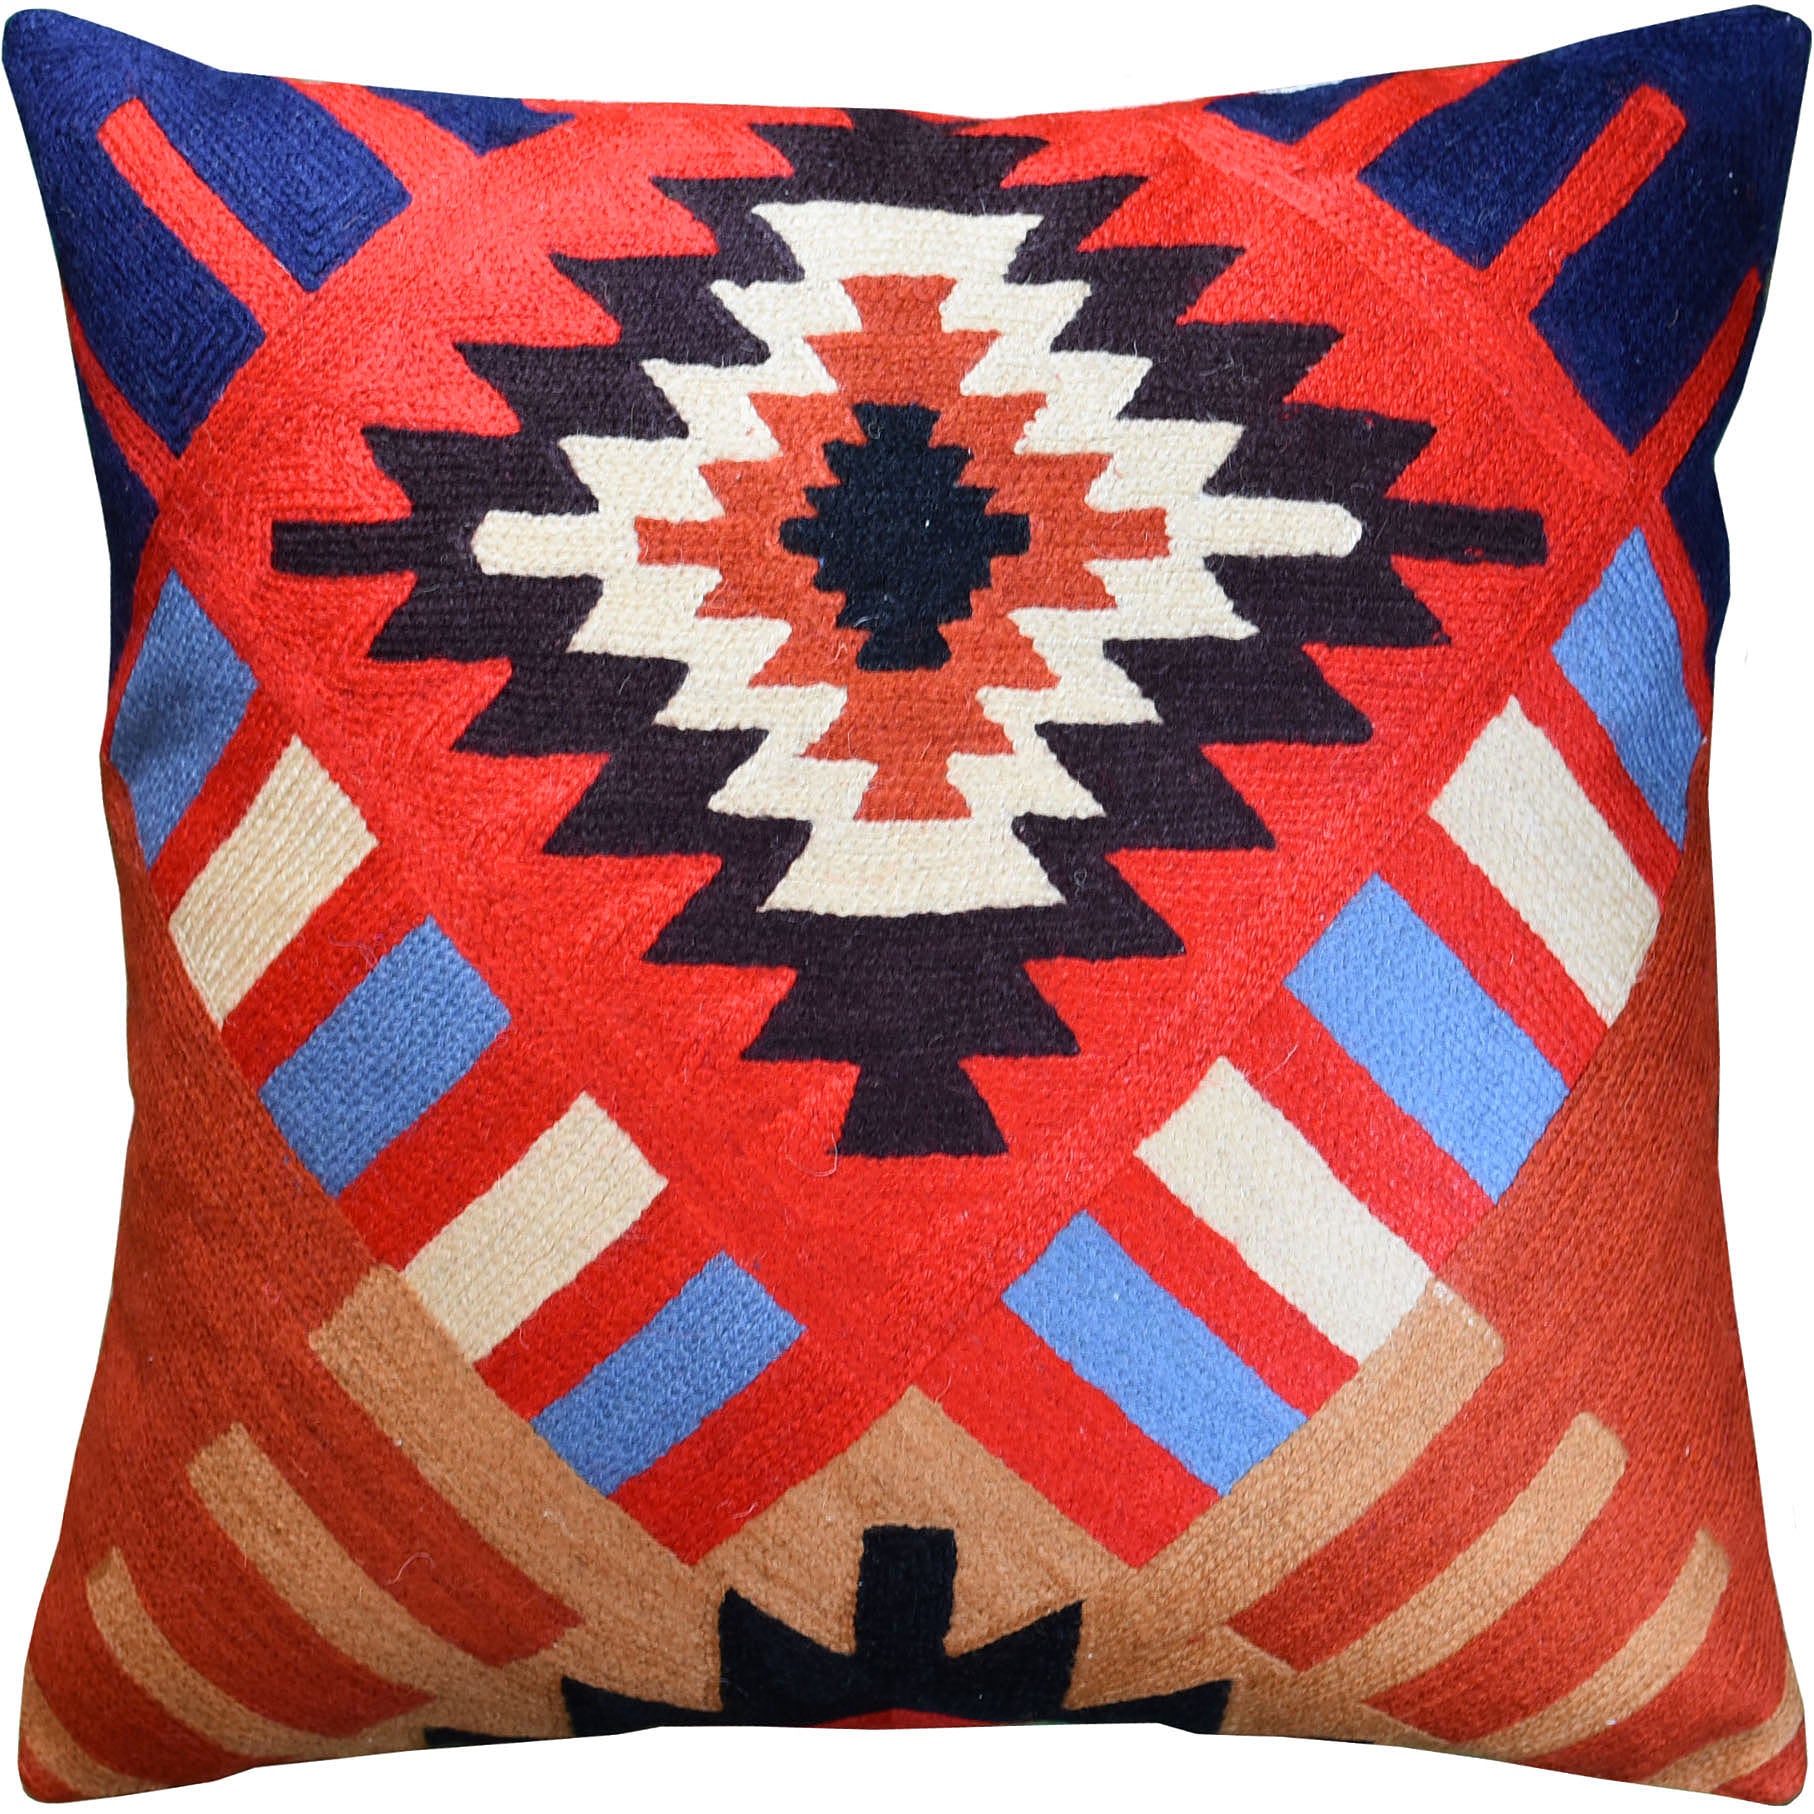 Azteca Pillow Cover 18x18" Southwestern Lodge or Home Decor FREE SHIPPING #03 